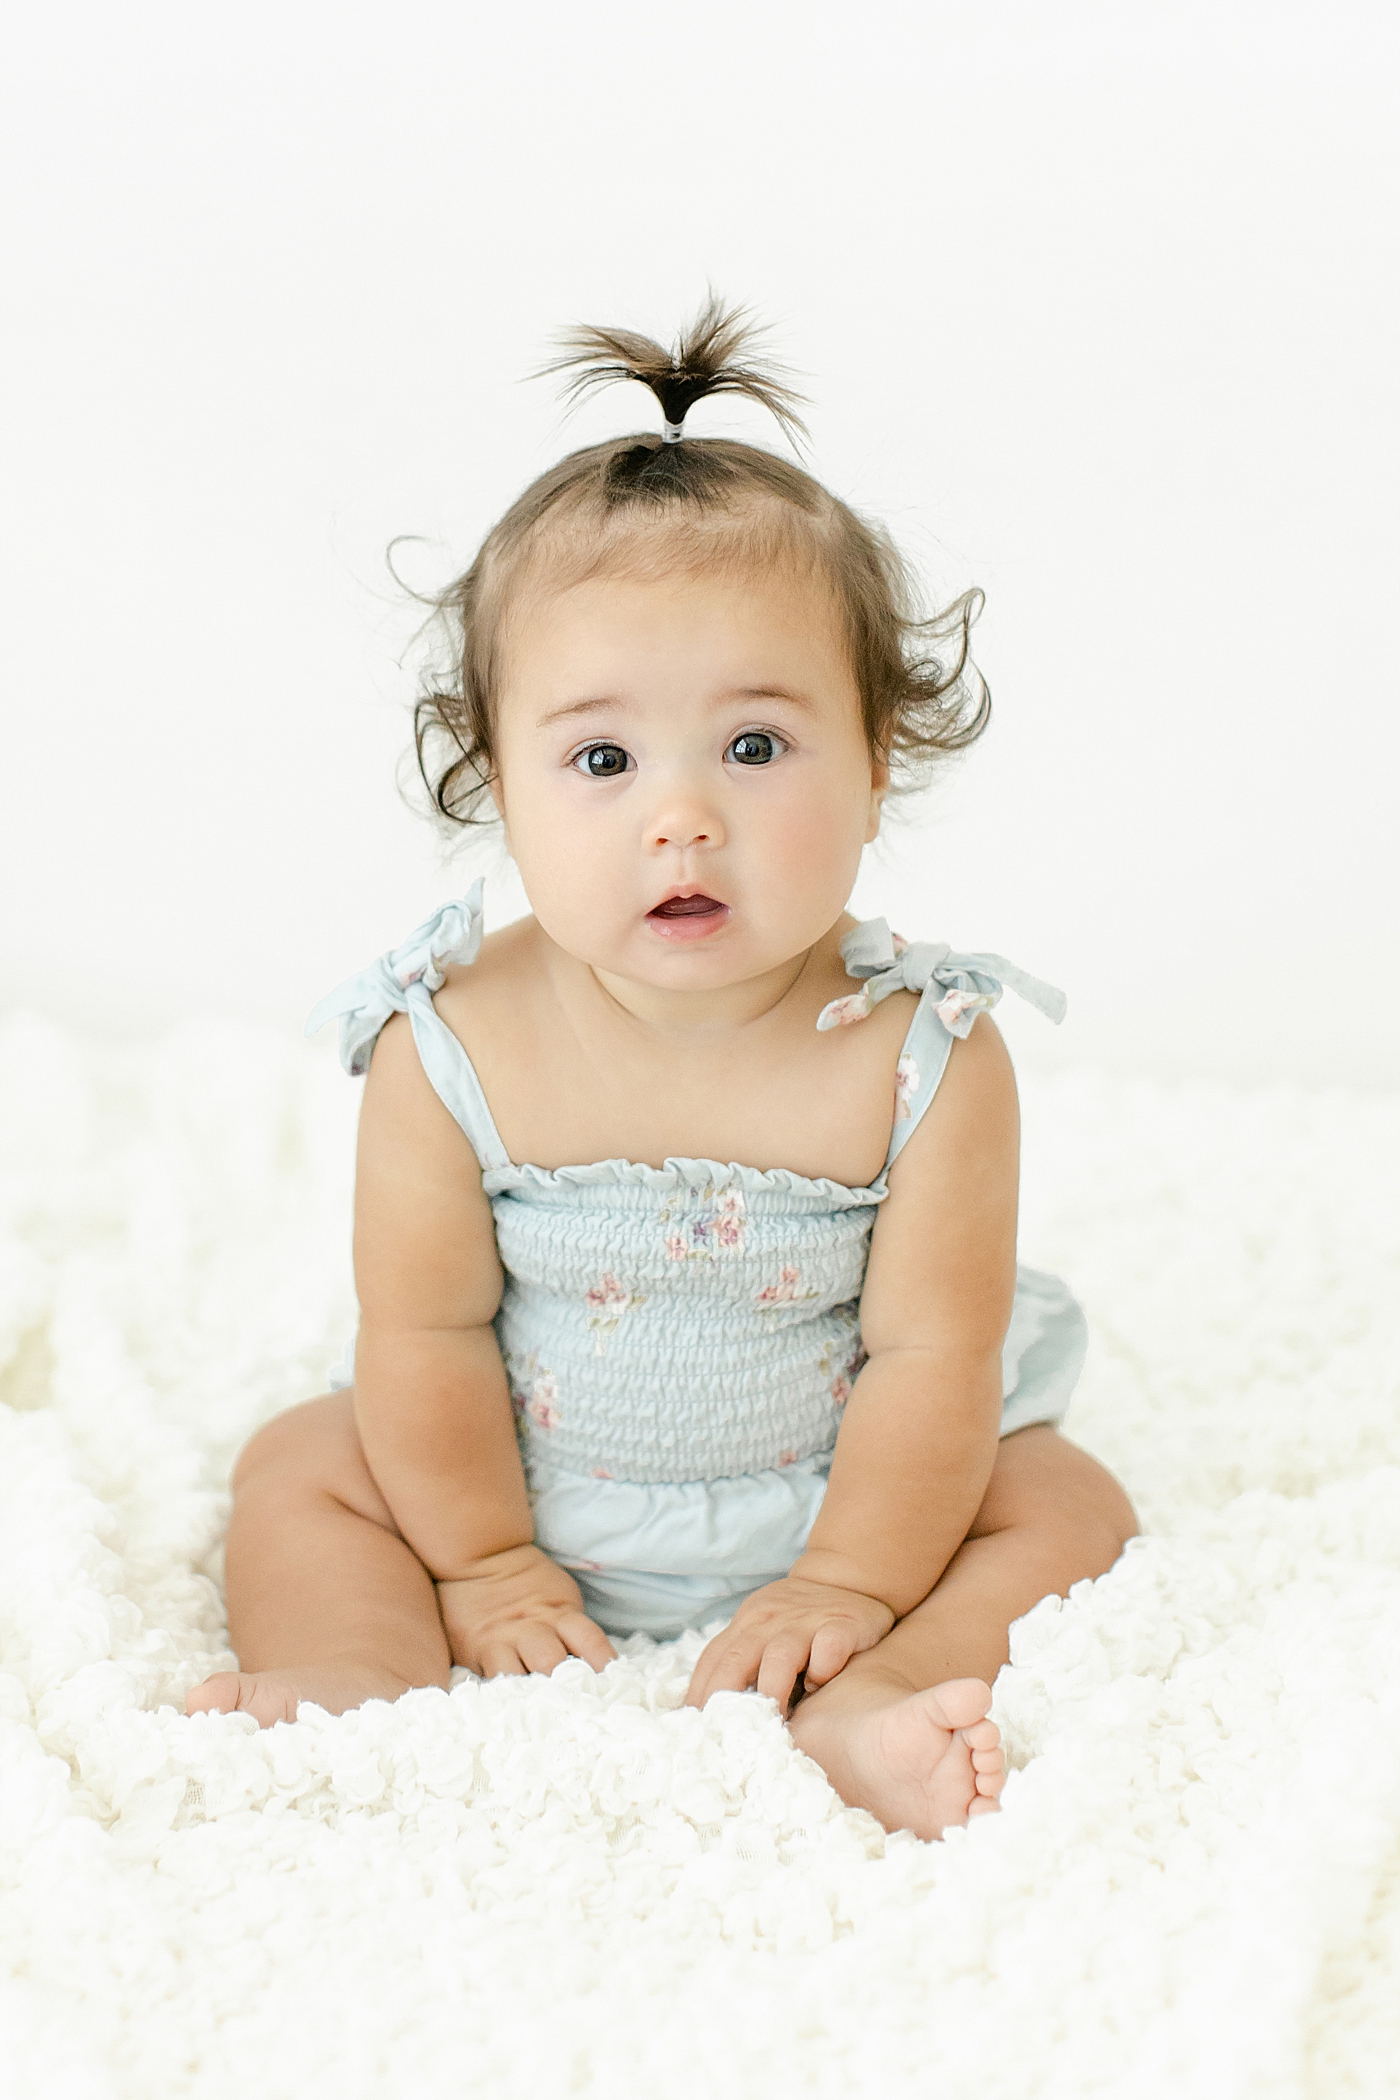 Detail of baby girl in a blue jumper | Image by Chrissy Winchester Photography